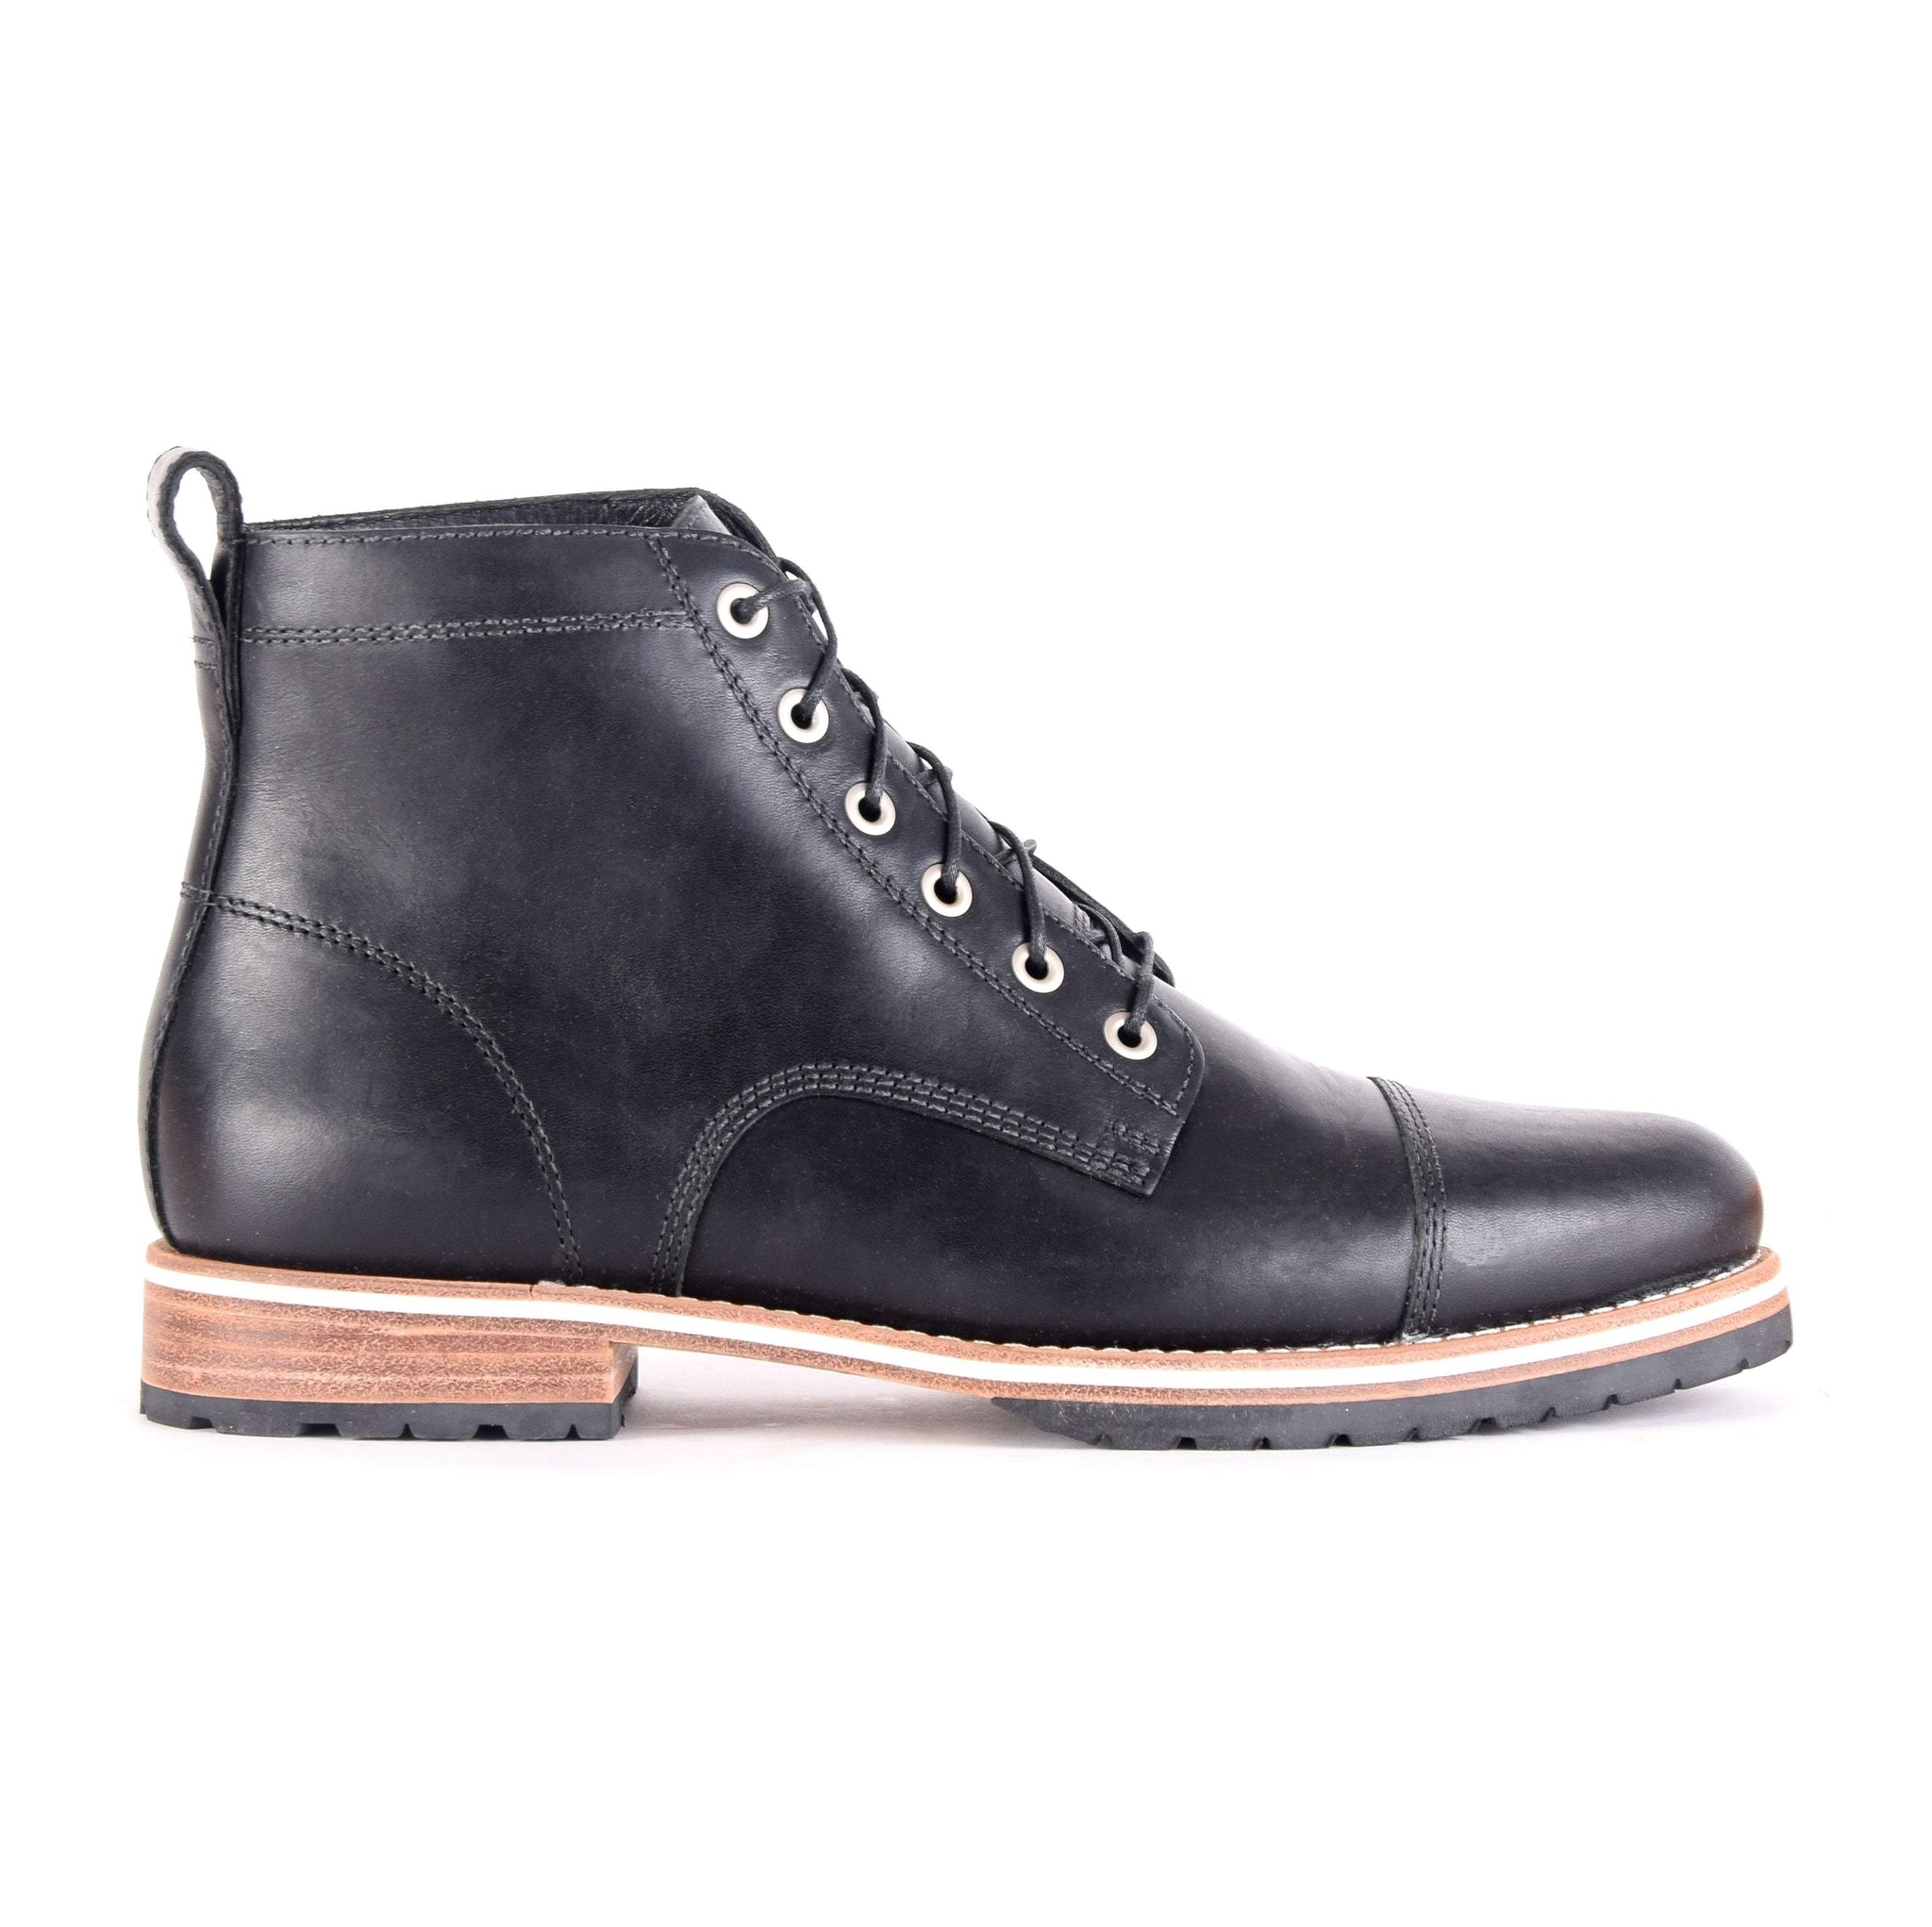 The Hollis Black by HELM Boots